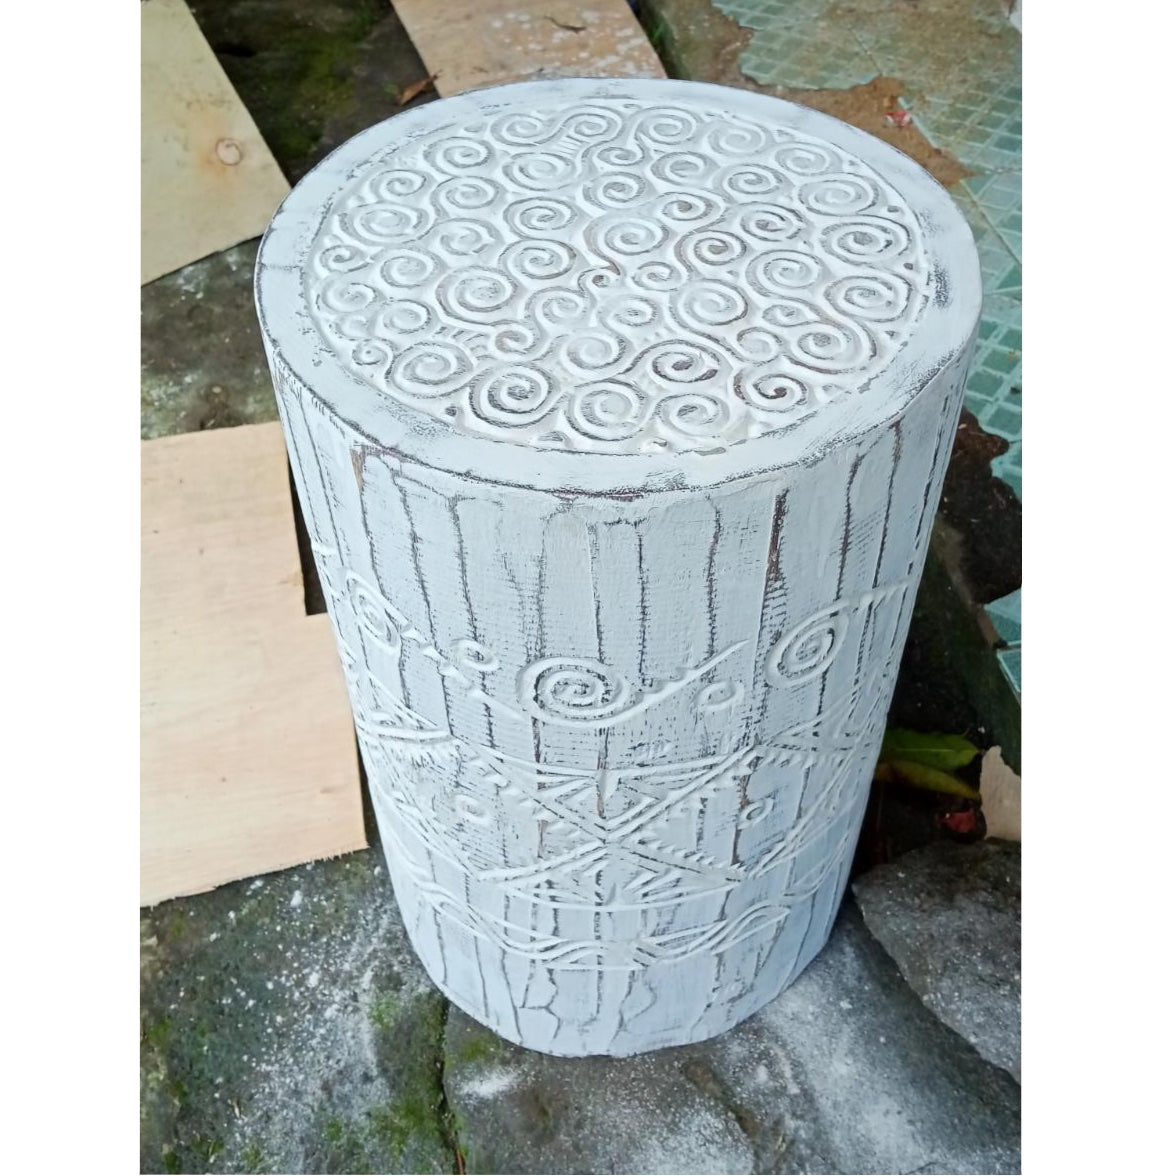 Tribal Carved Palm Stool - White Wash | Pre Order